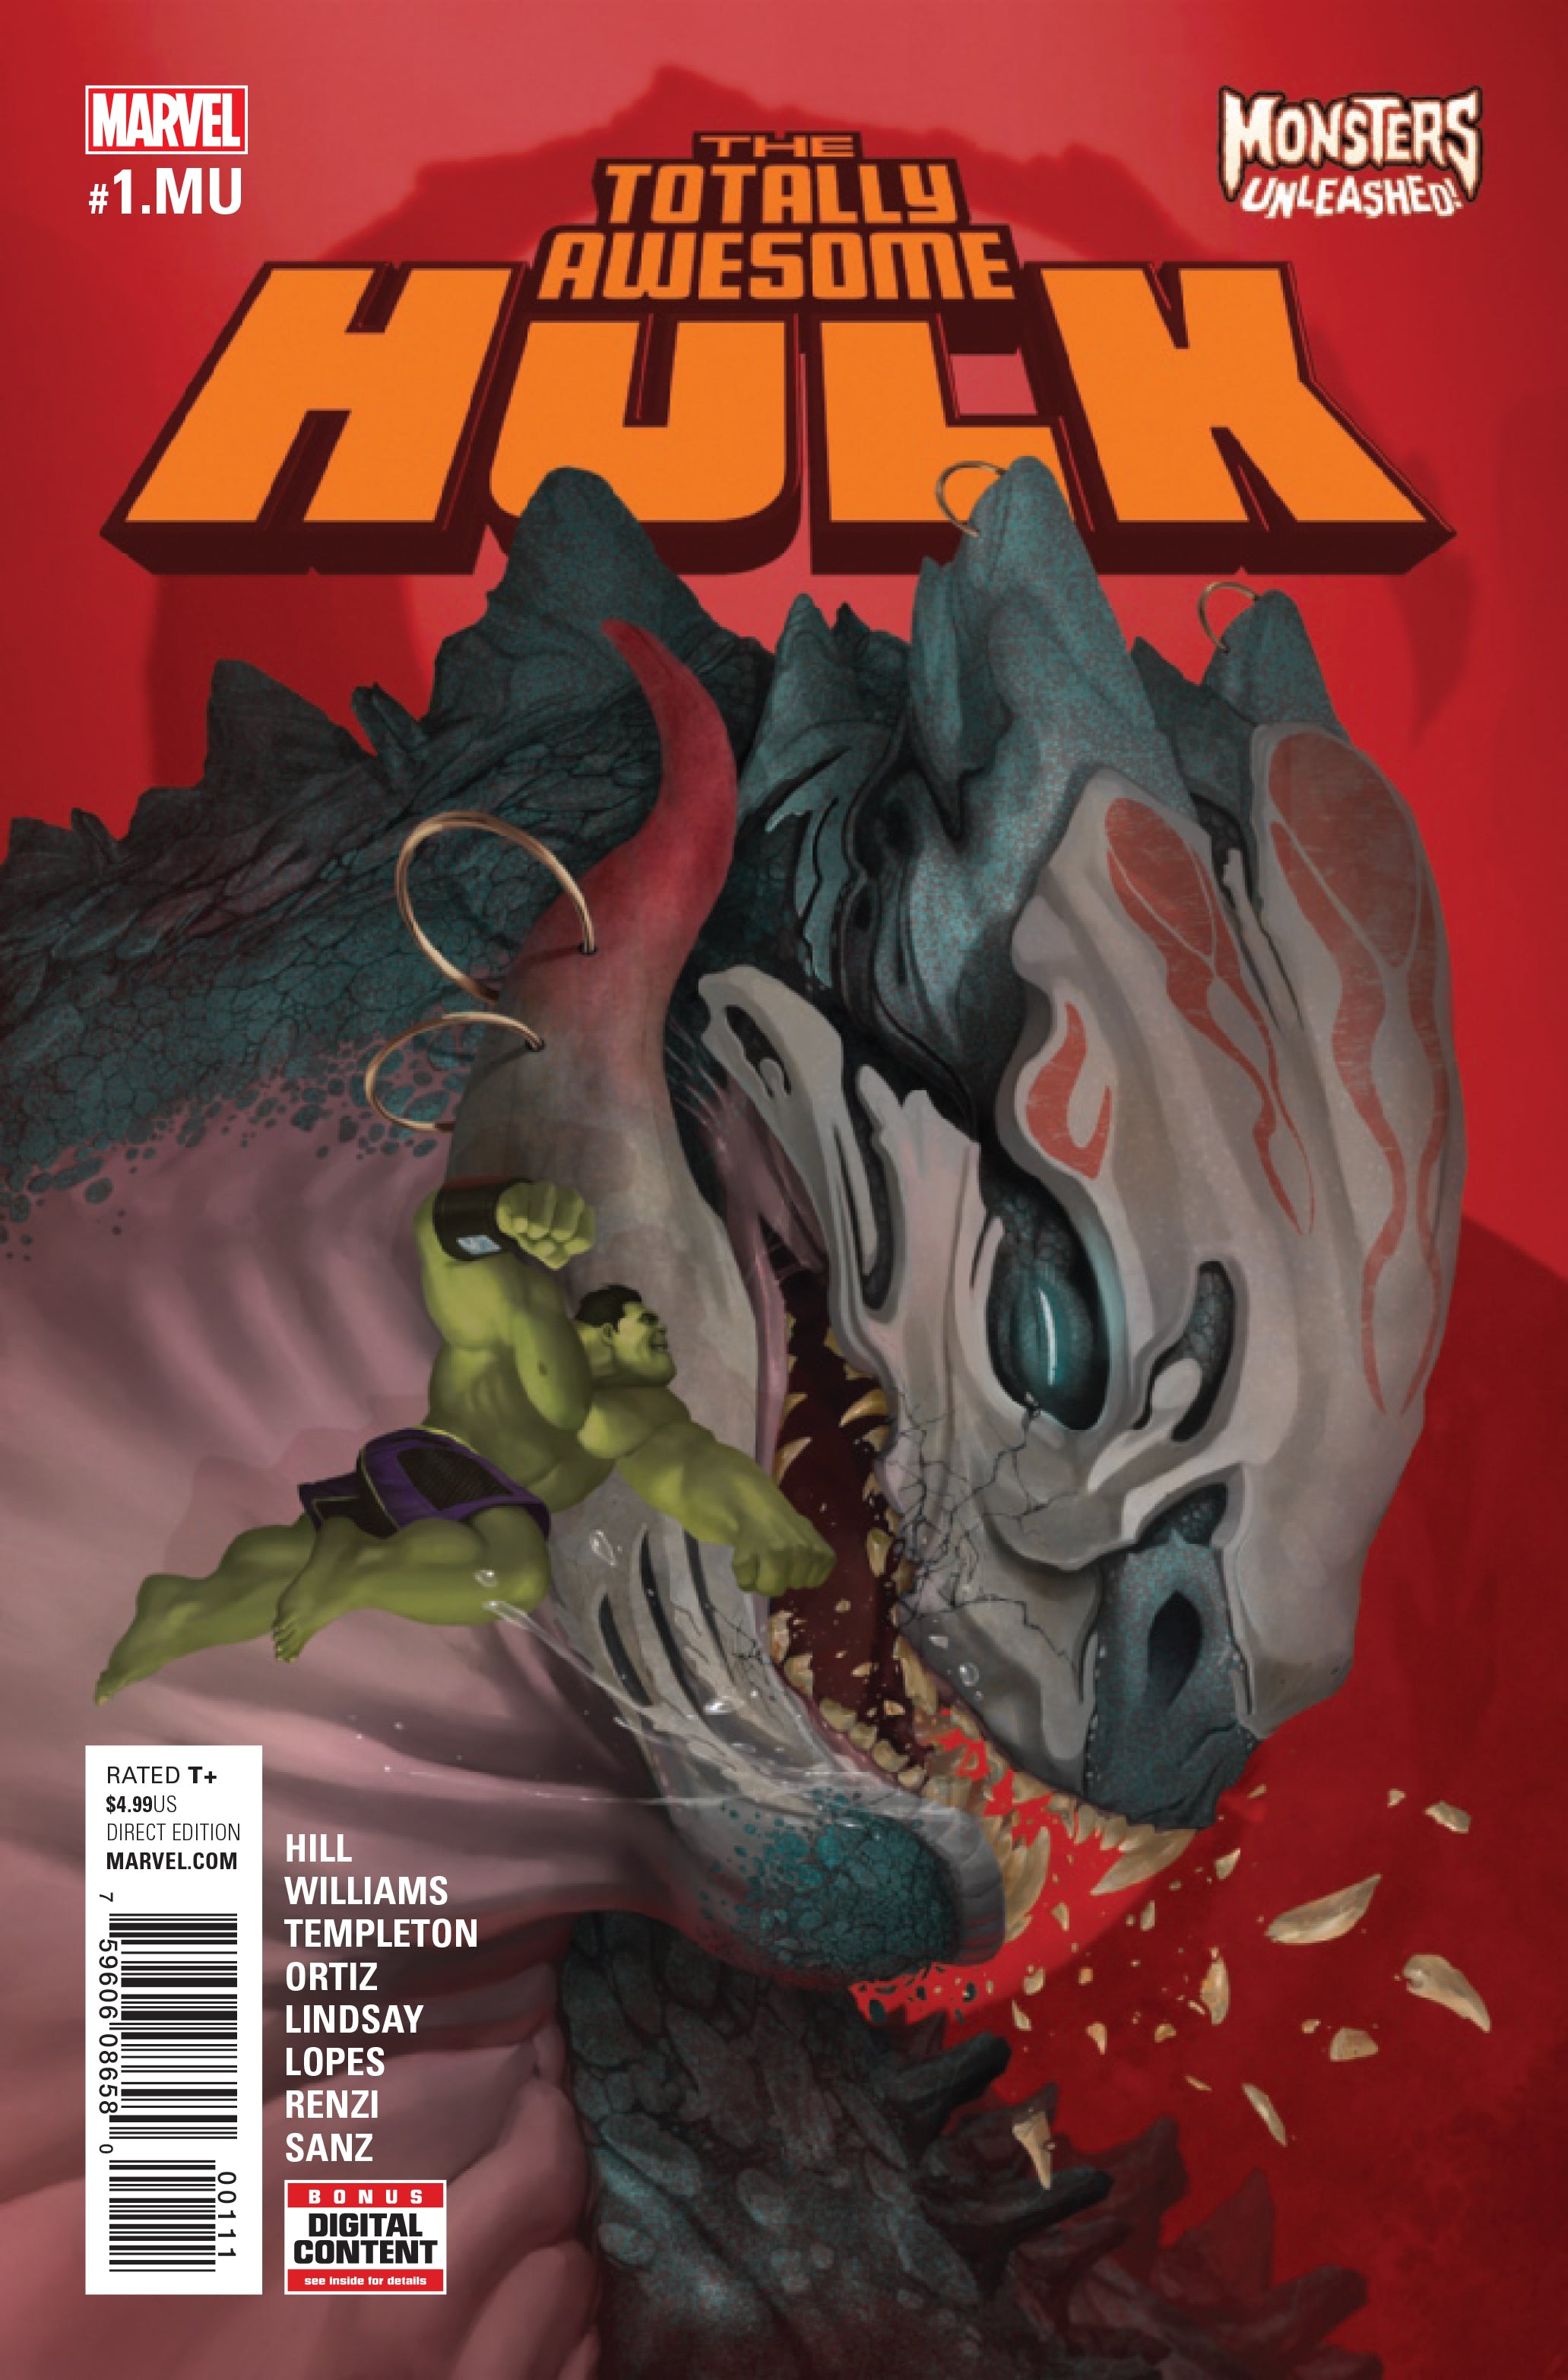 TOTALLY AWESOME HULK #1.MU | Game Master's Emporium (The New GME)